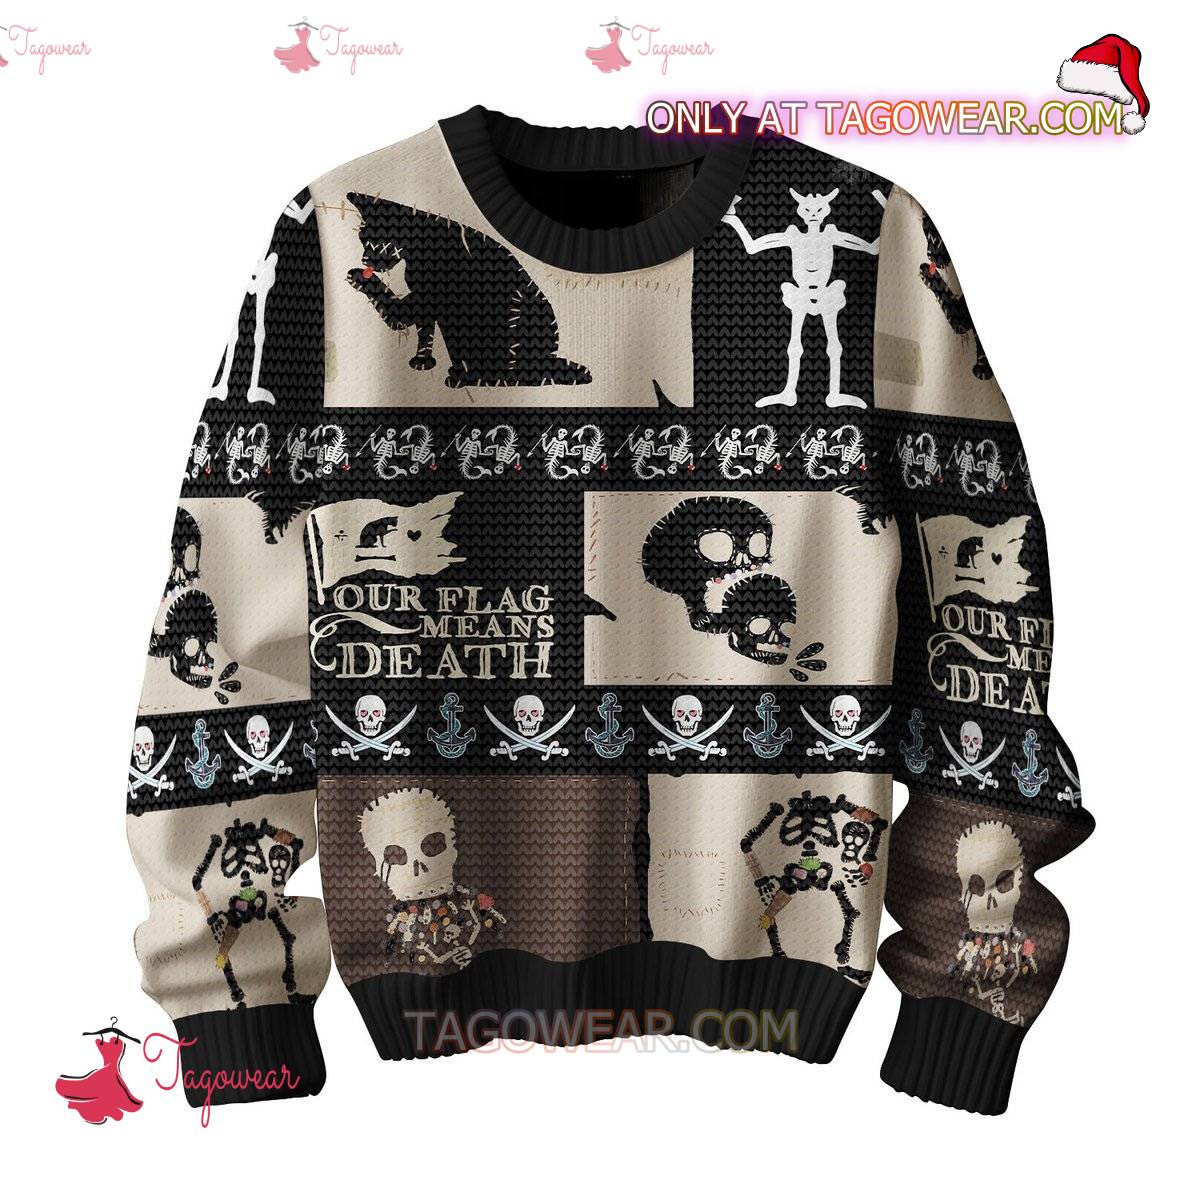 Our Flag Means Death Skull Christmas Sweater a